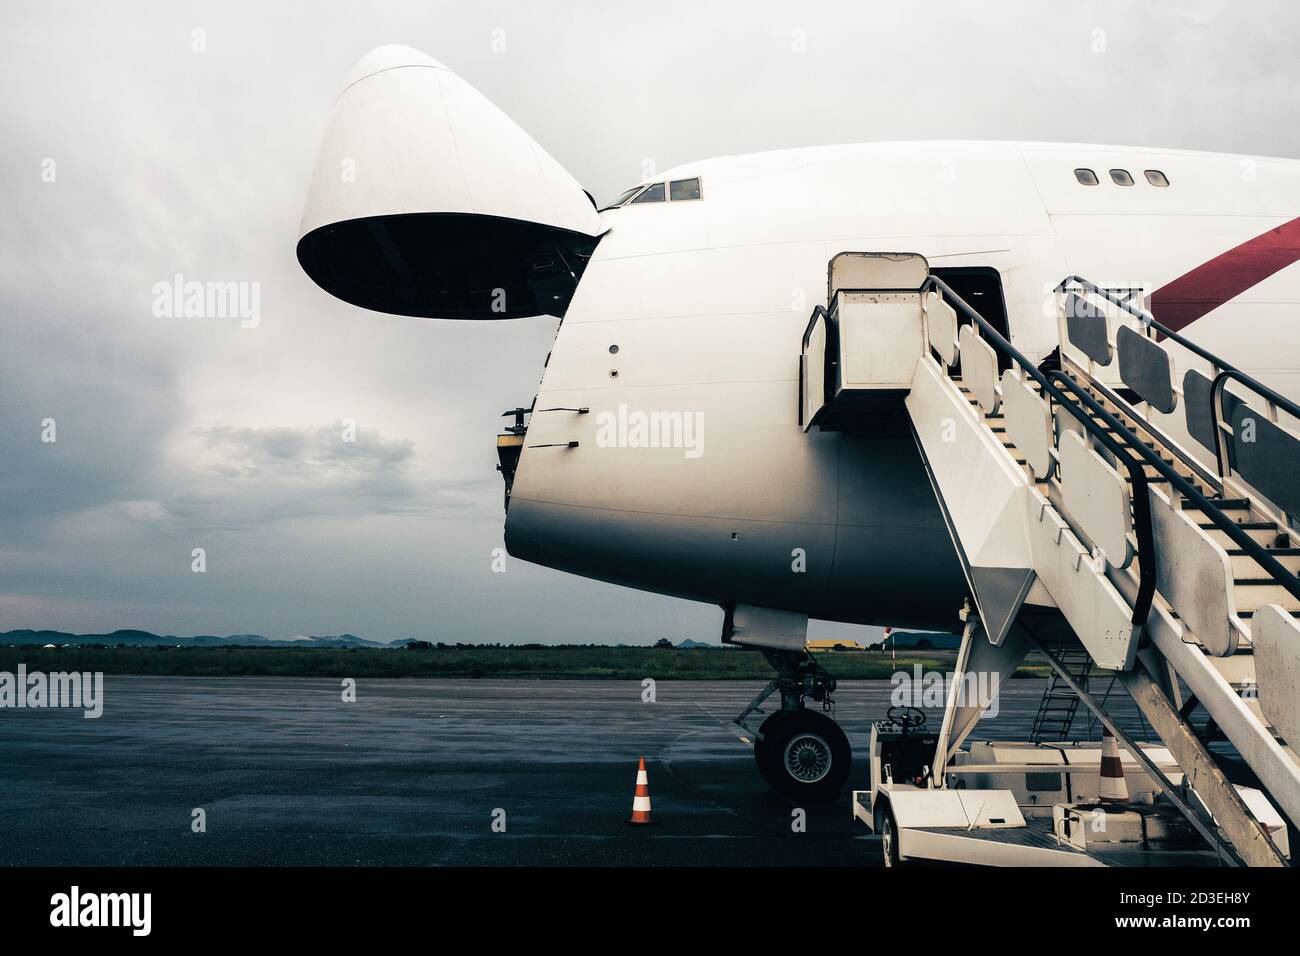 A Jumbo Jet freighter aircraft with a wide open nose cargo door waiting at a cargo ramp for a high-loader to be offloaded Stock Photo